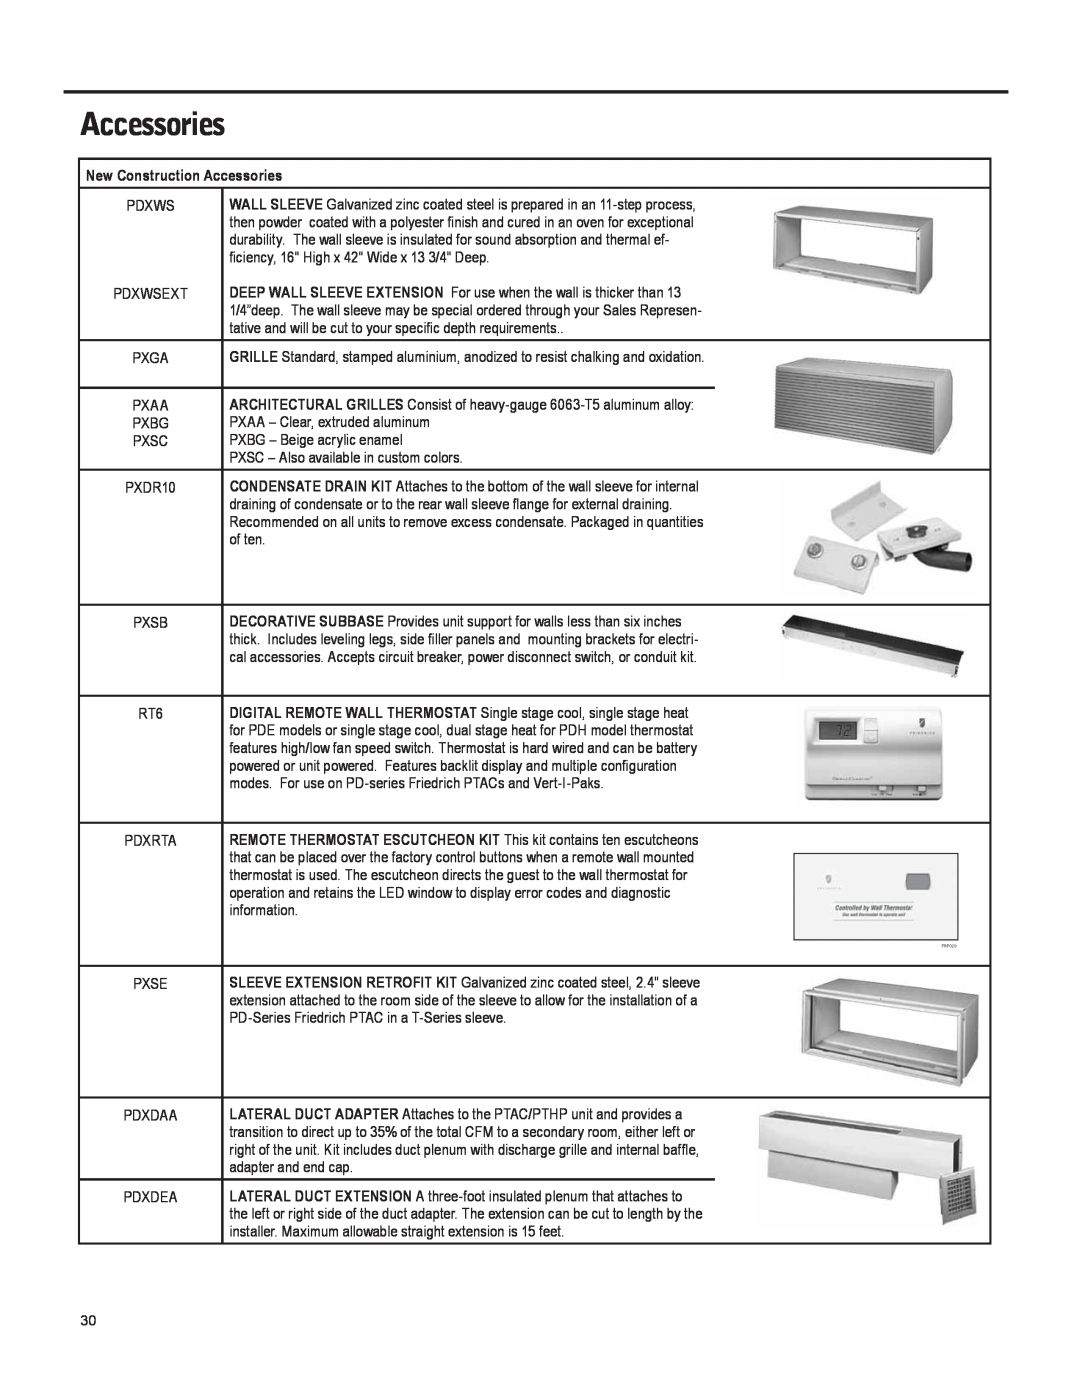 Friedrich 920-087-09 (12/10) operation manual New Construction Accessories 